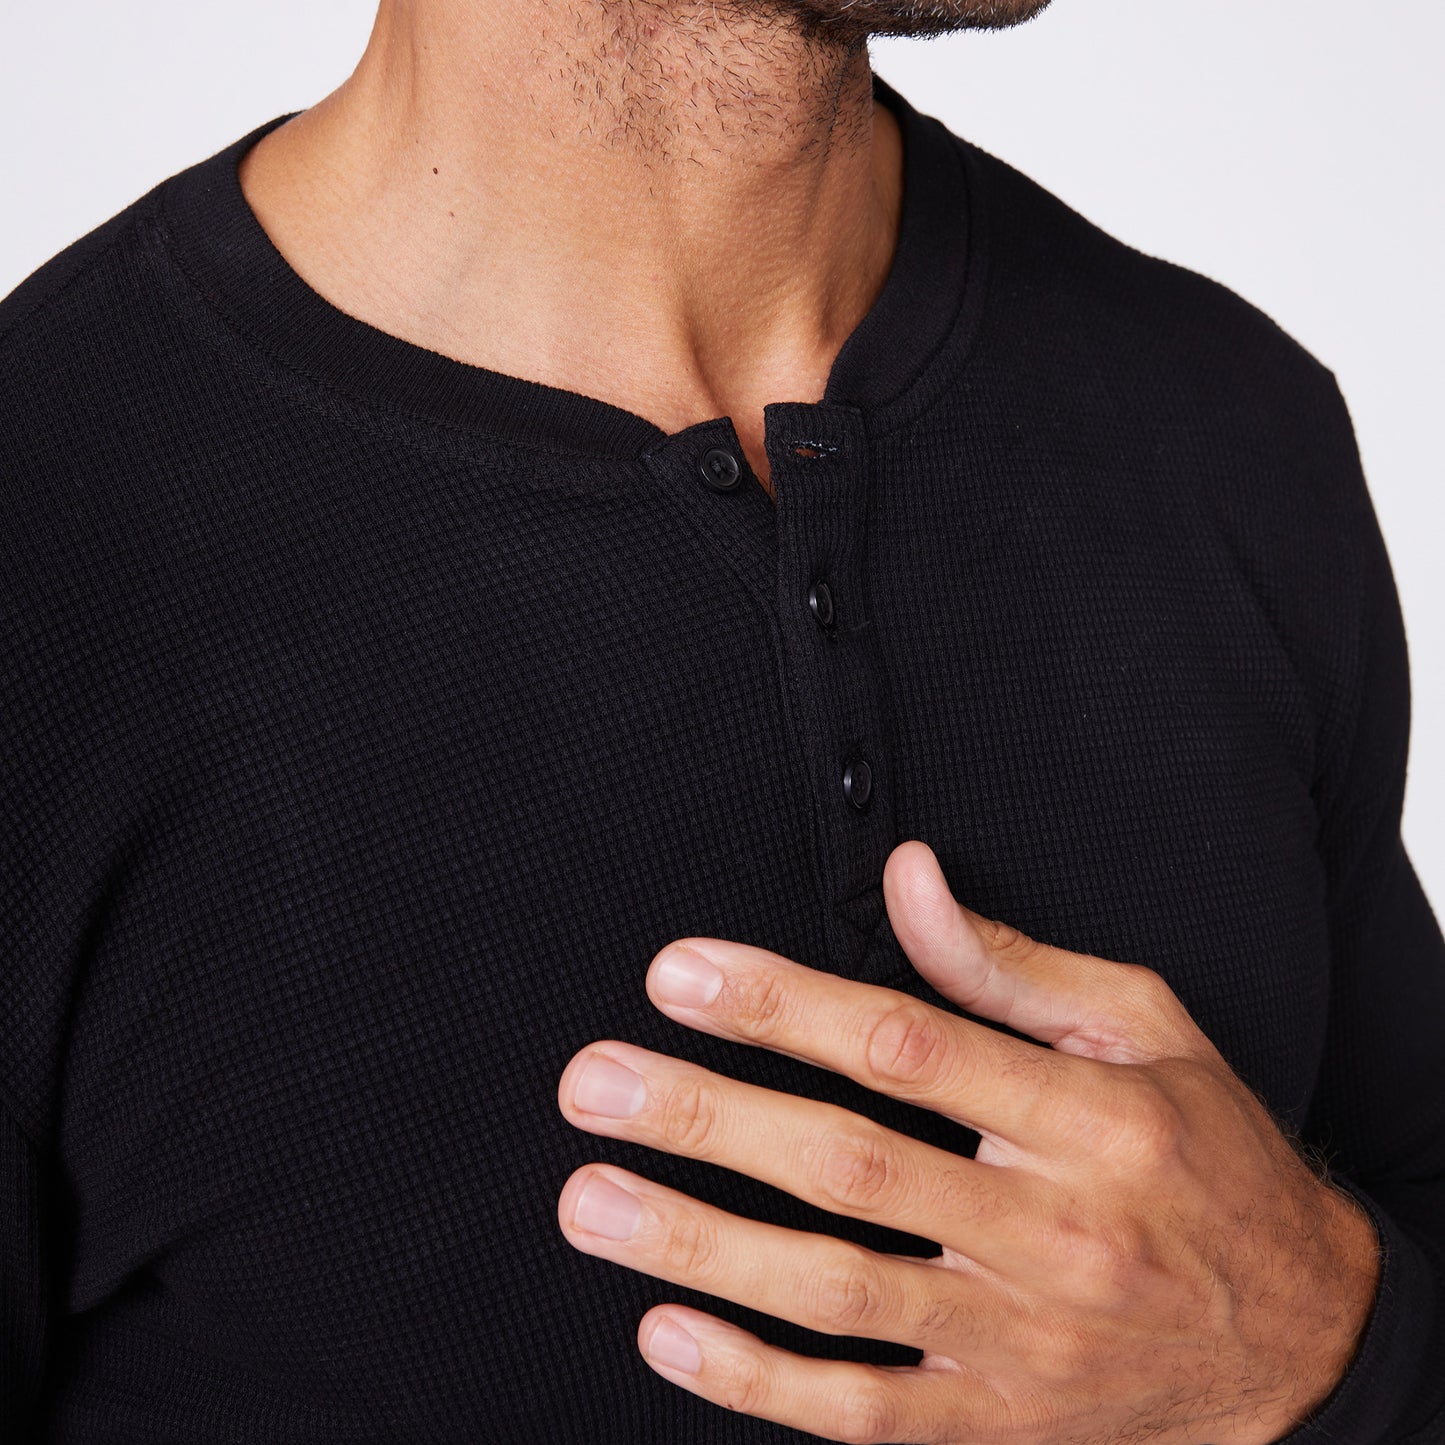 Thermal Henley